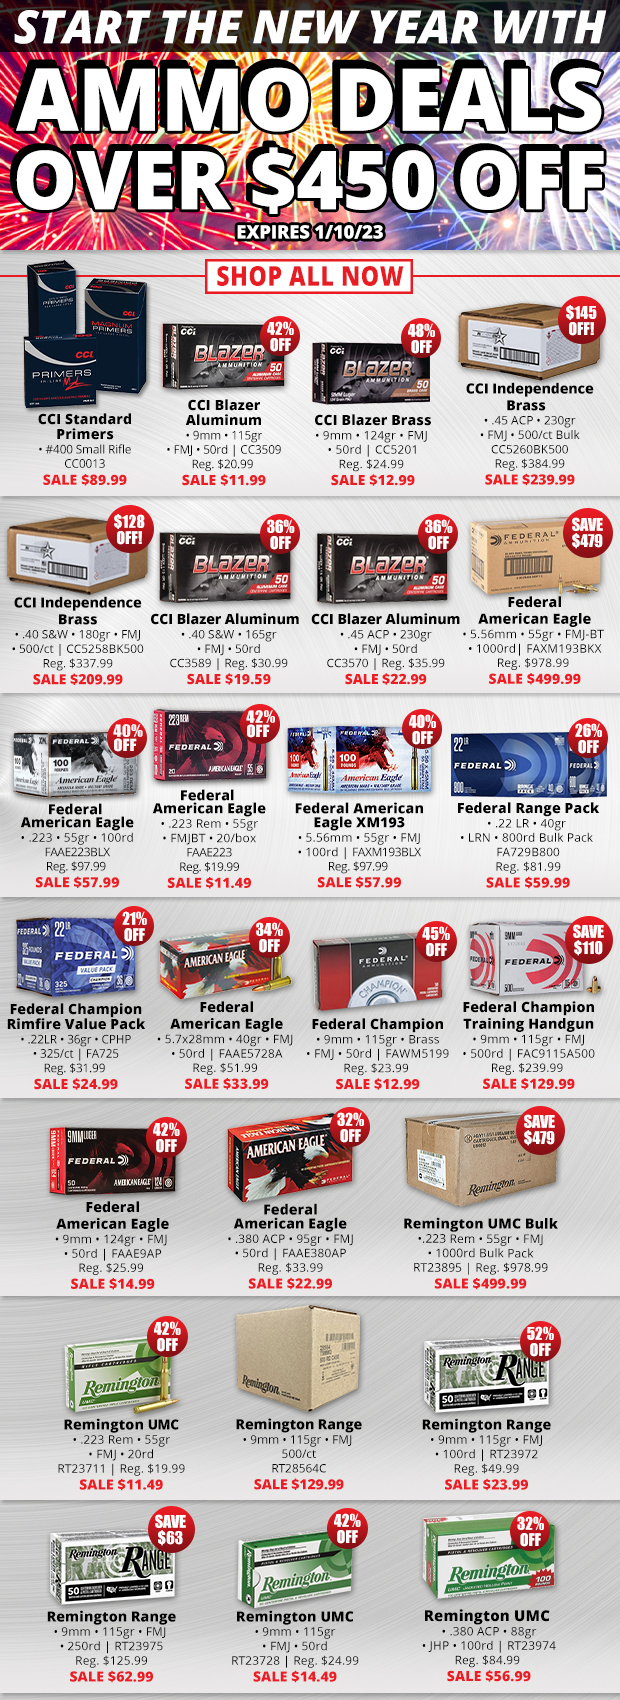 Start the New Year with Ammo Deals Over $450 Off